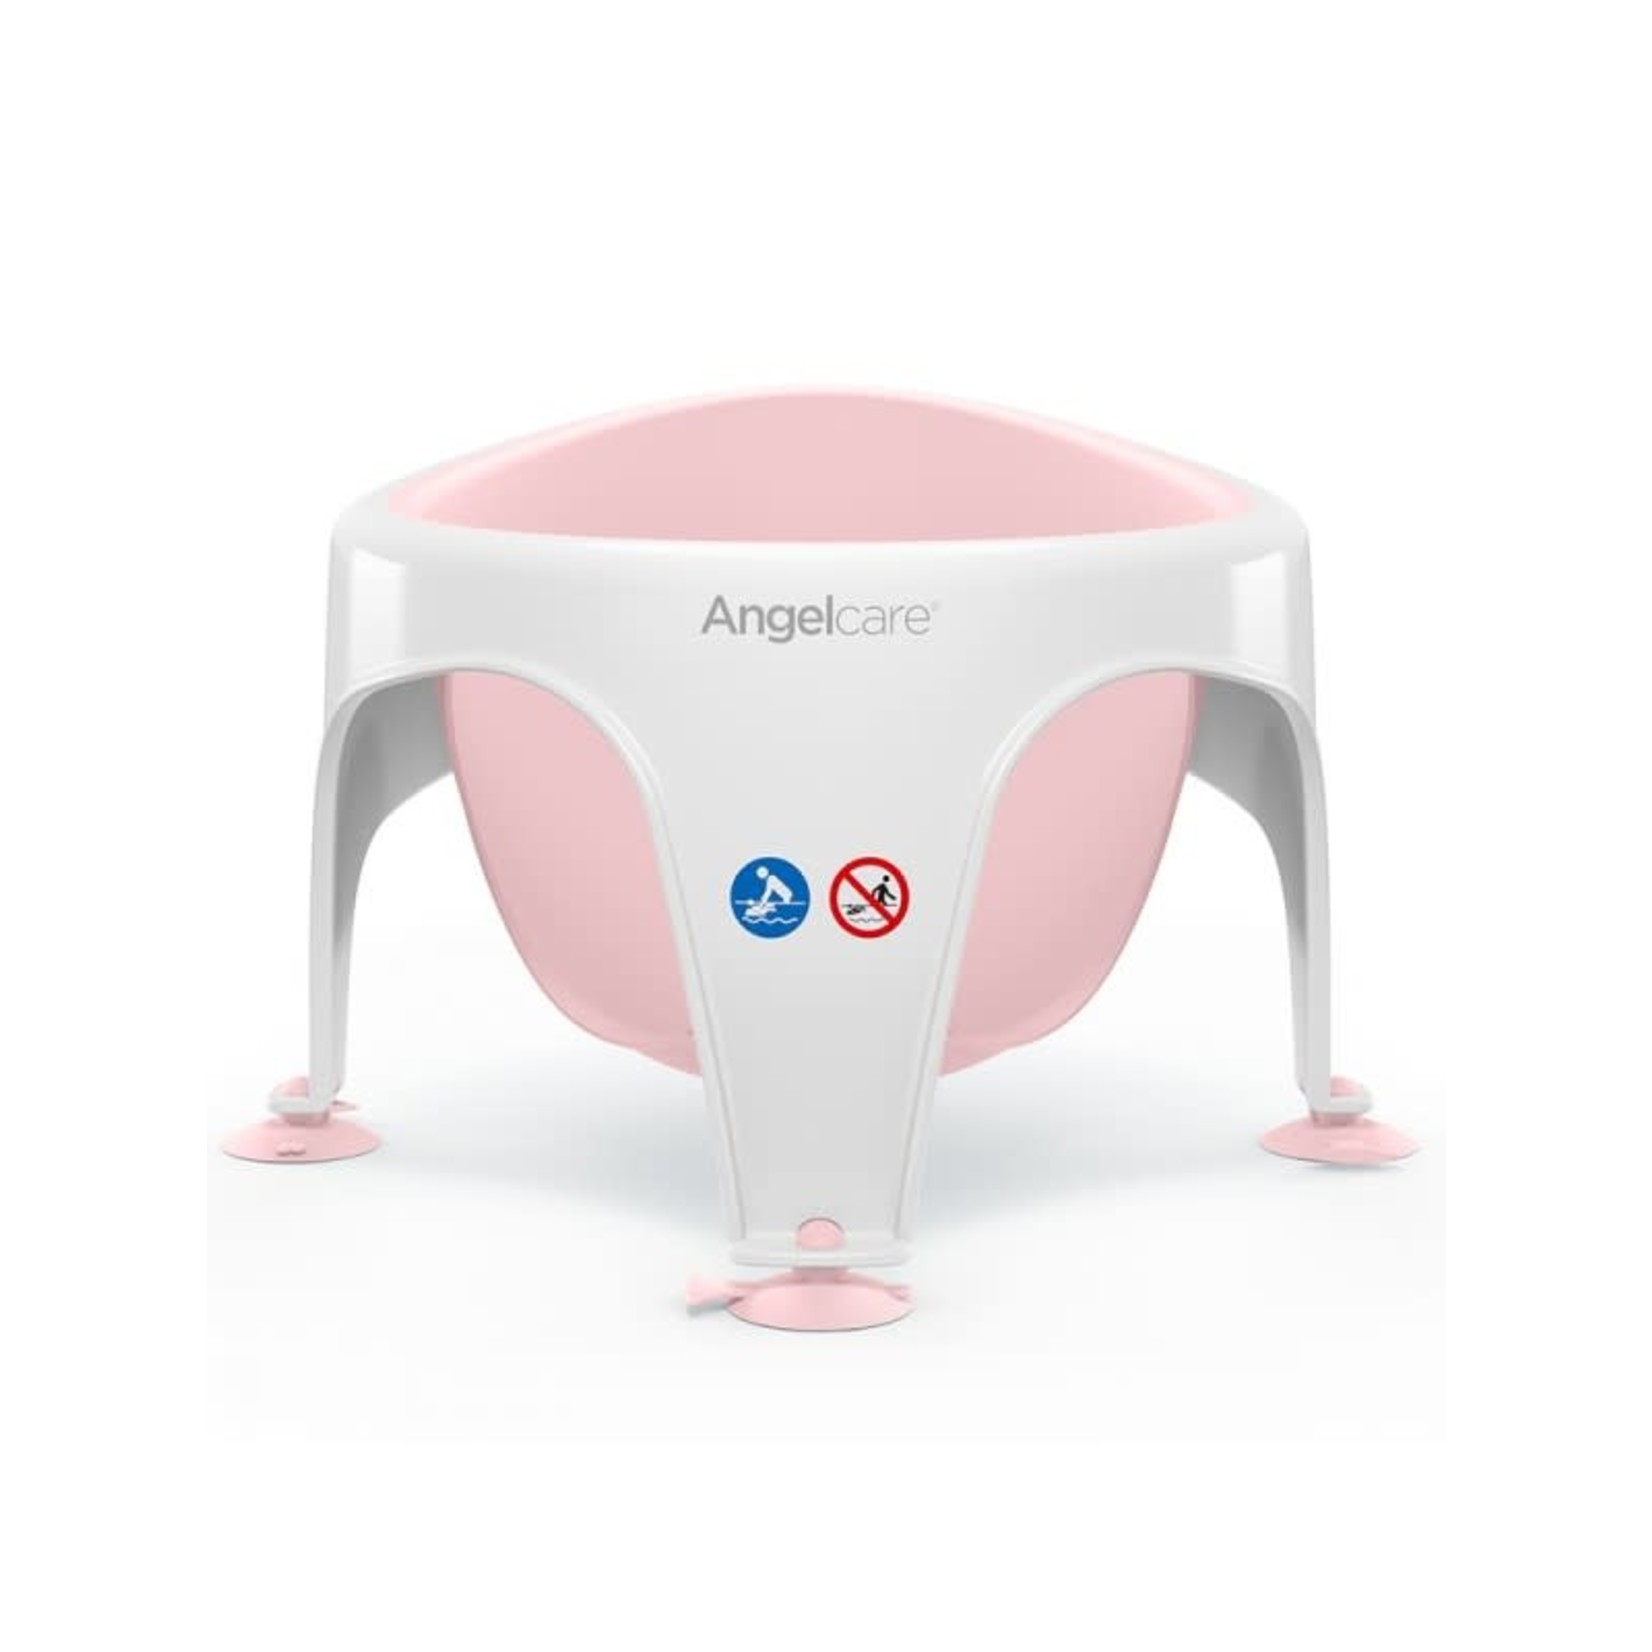 Angelcare Angelcare - Bath - Seat - Pink